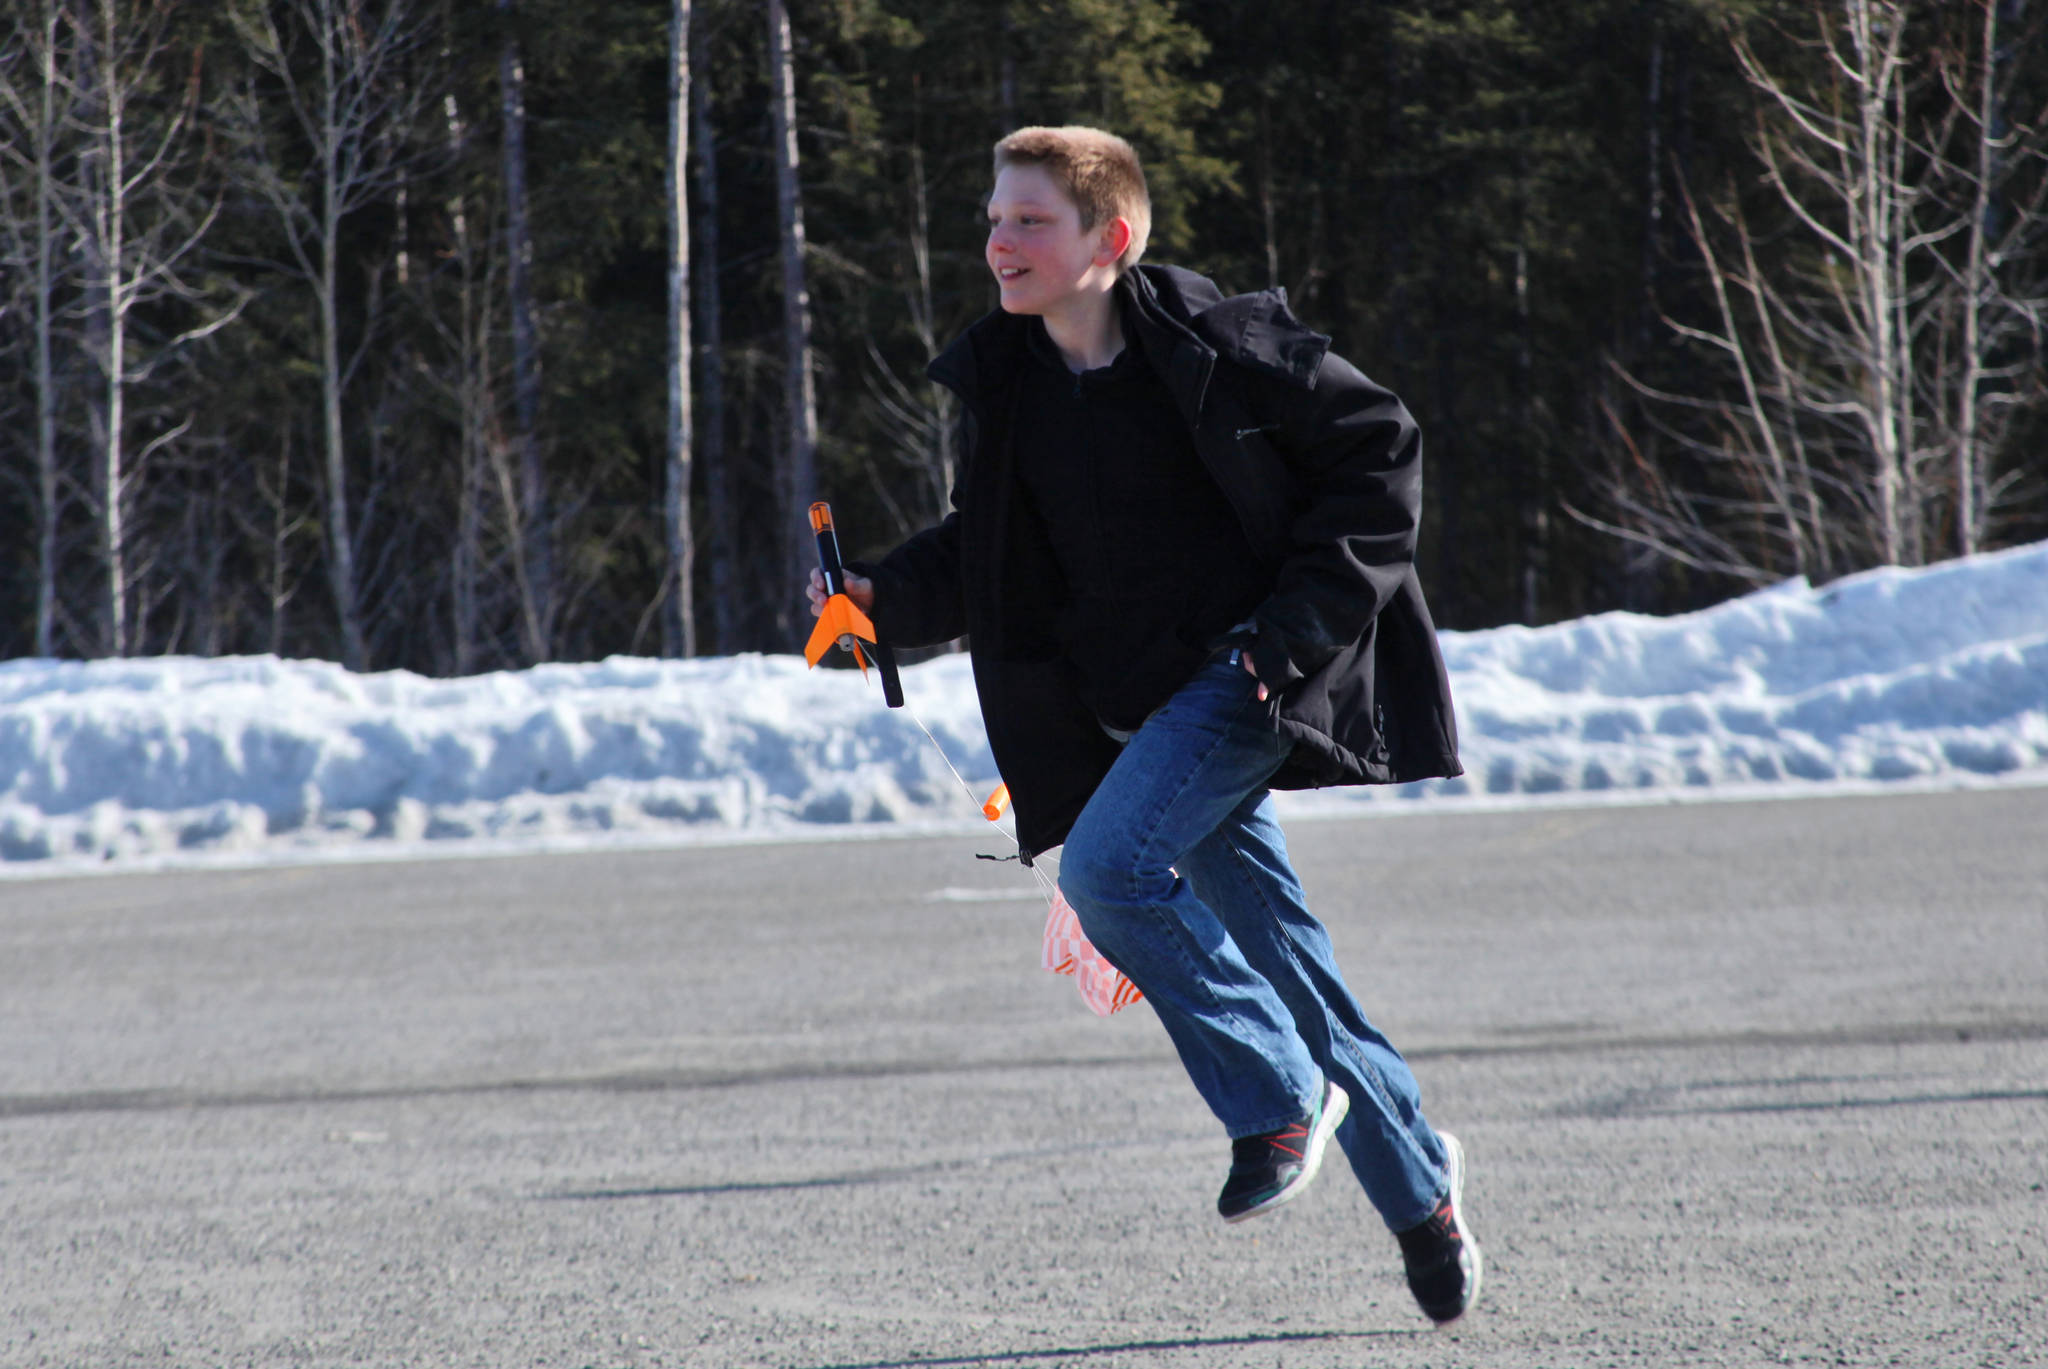 After catching a model rocket as it parachuted to Earth, Asa Lorentzen returns to the launch site during Scott Aleckson’s model rocketry class in the parking lot of the Soldotna Regional Sports Complex in Soldotna on Saturday. Aleckson said he made and launched his first plastic, balsa wood, and cardboard rocket as a 4th grade student at Soldotna Elementary School. Since then he’s built a custom launch system, he said, “with recycled electronics and a lot of soldering time.” Aleckson taught Saturday’s rocketry class through the Soldotna Community Schools program, and would like to continue spreading the hobby. “If I could get a model rocket club going, that’d be great,” he said. “Stuff like this is much more fun in a group.” (Photo by Ben Boettger/Peninsula Clarion)